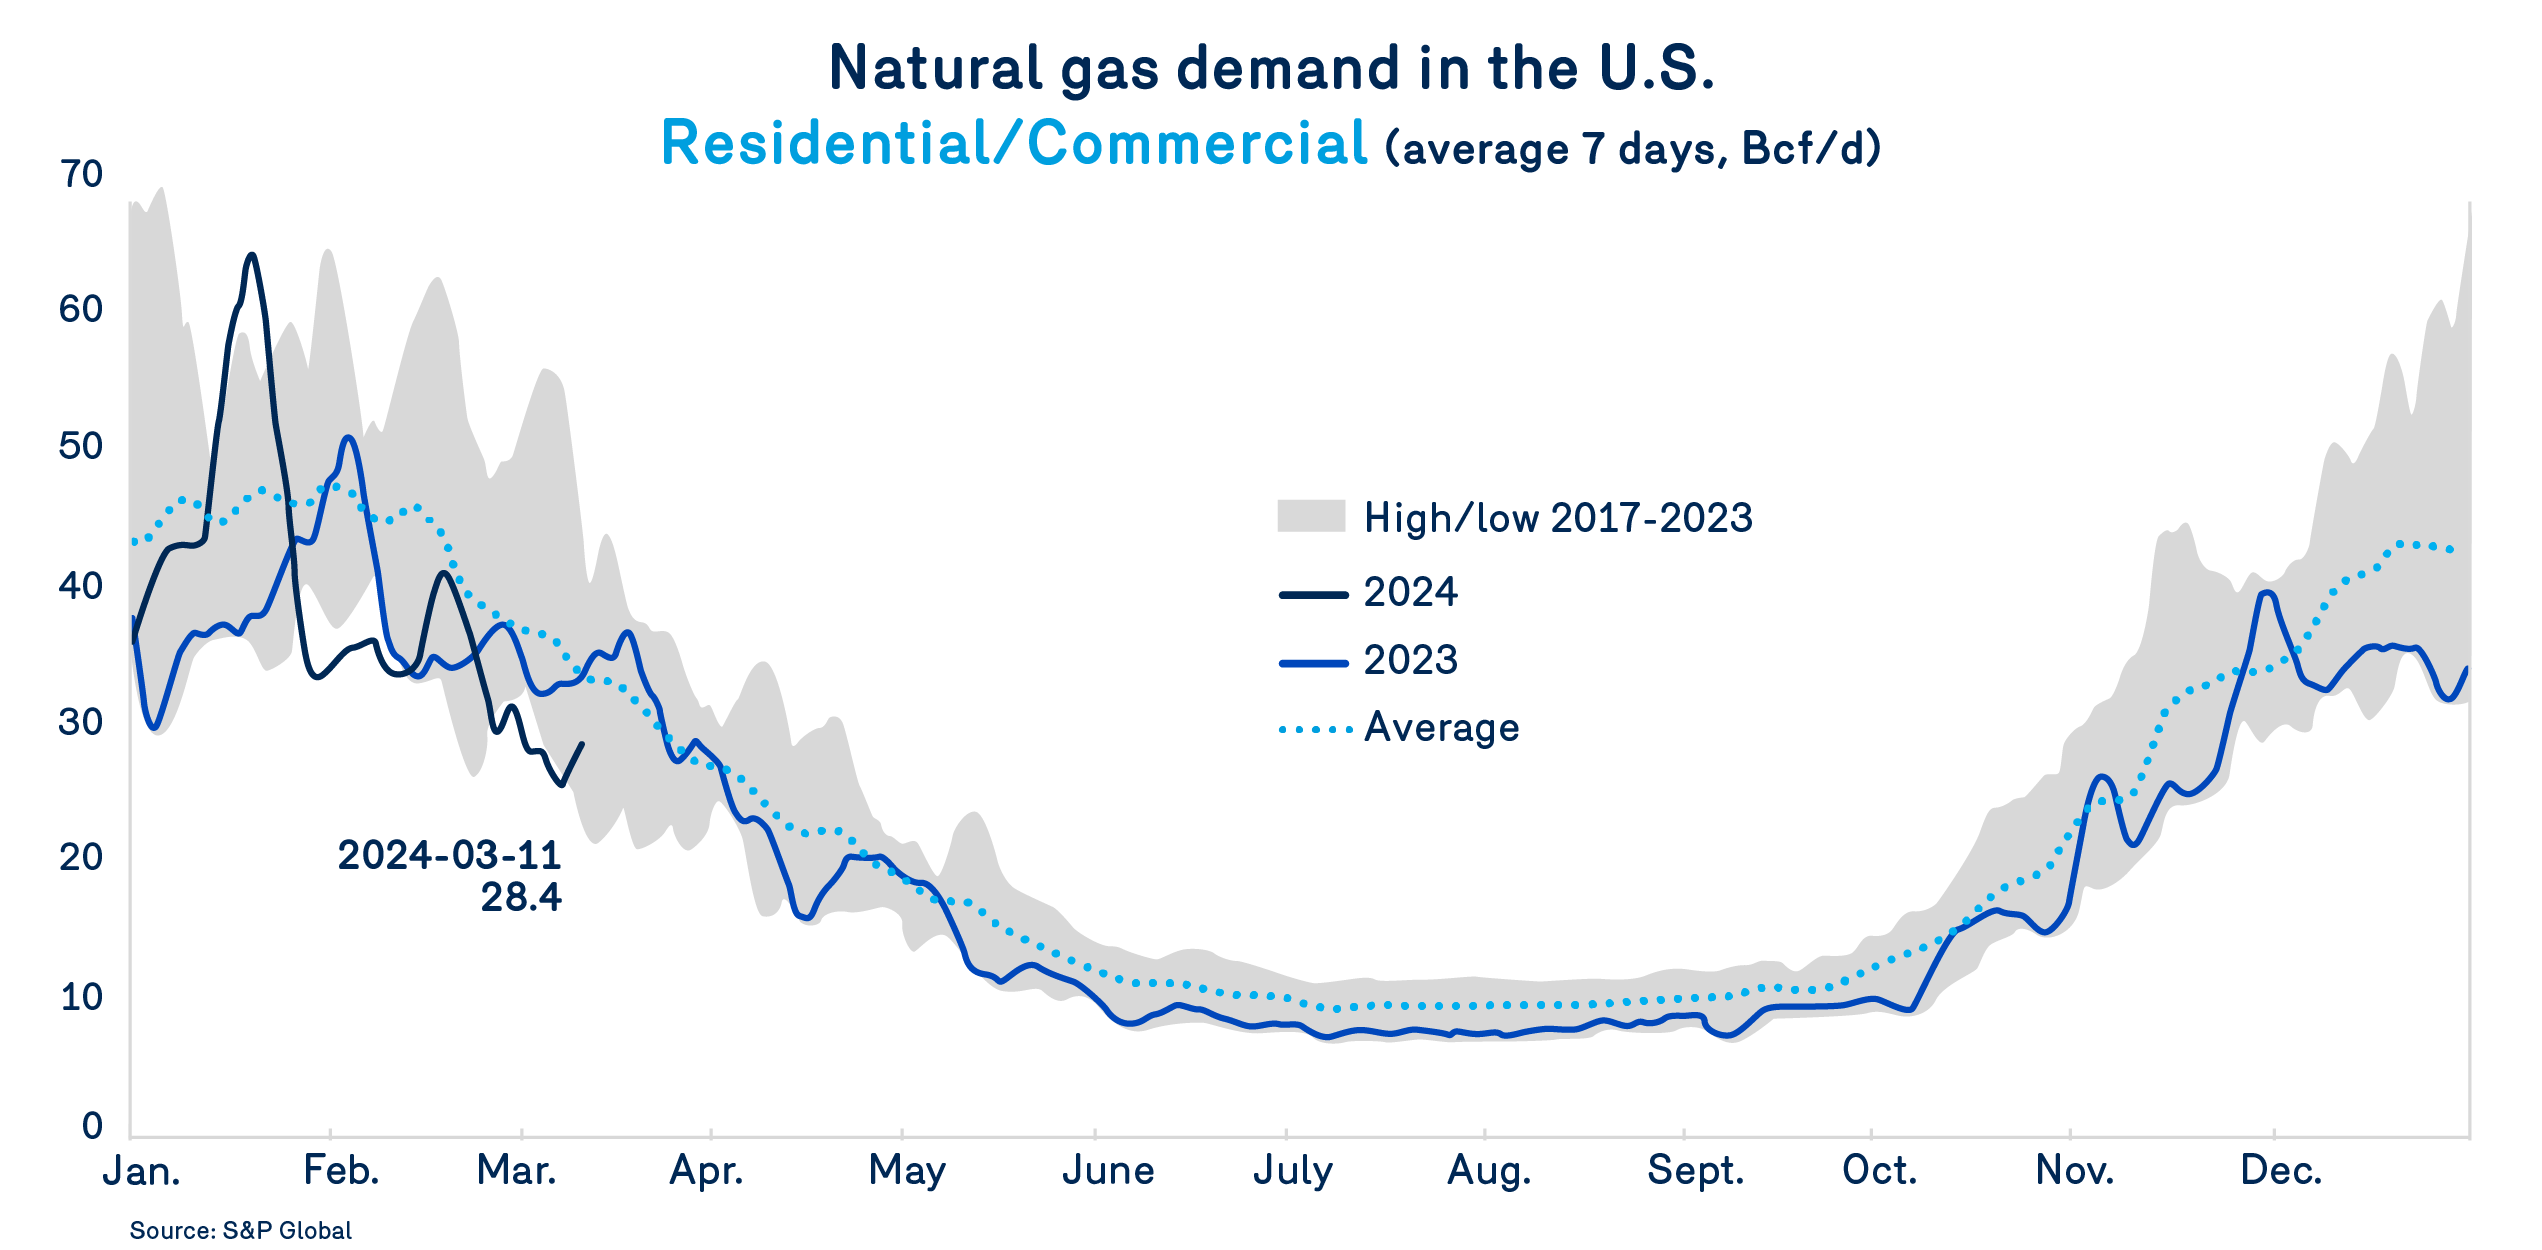 Natural gas demand in the U.S